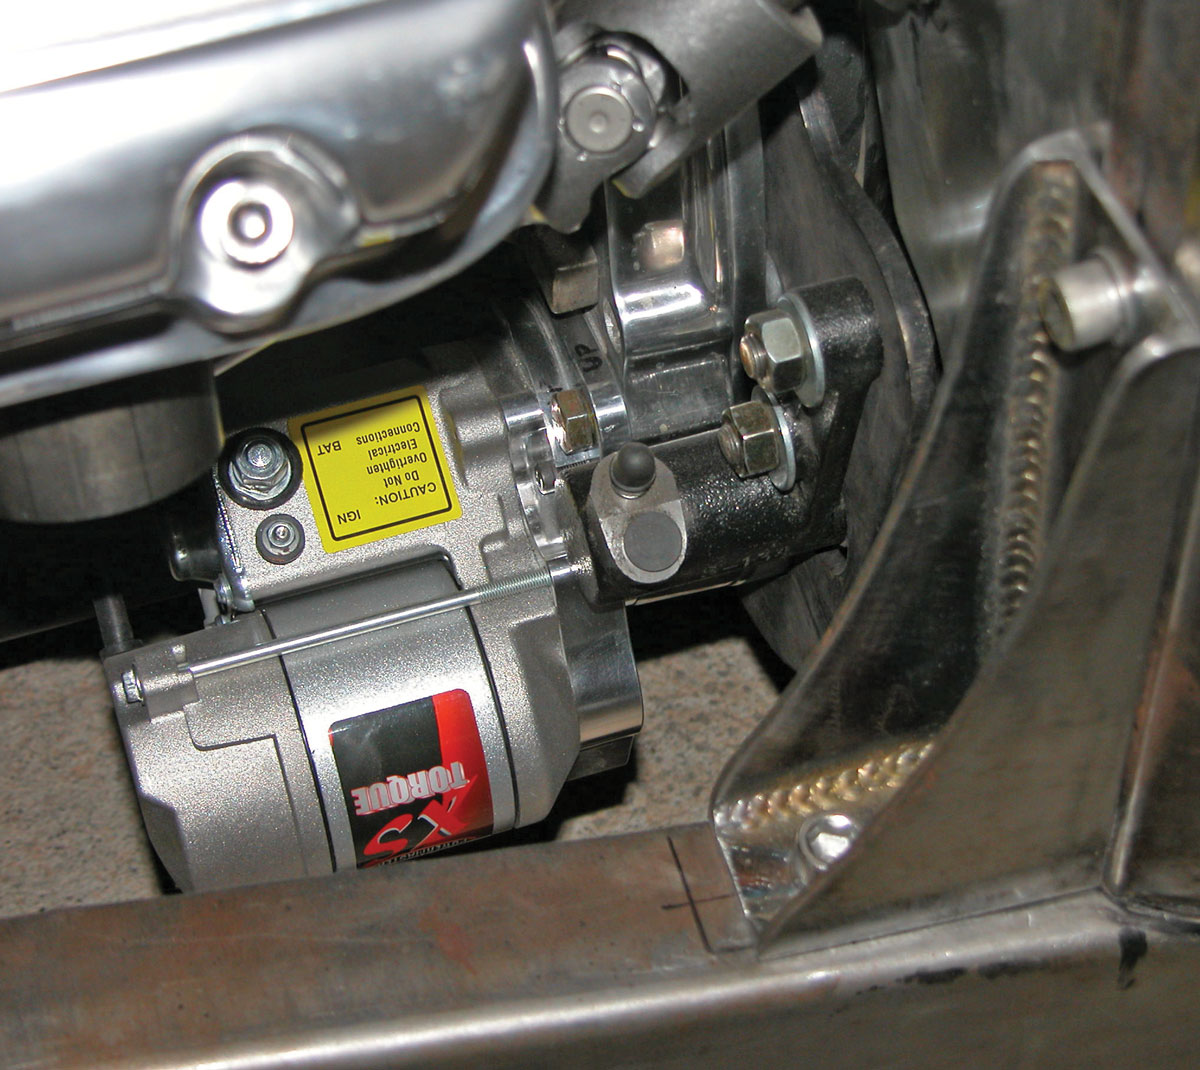 Tom uses a Powermaster XS Torque starter along with a 100A 1-V groove pulley (they come in one- or three-wire) alternator